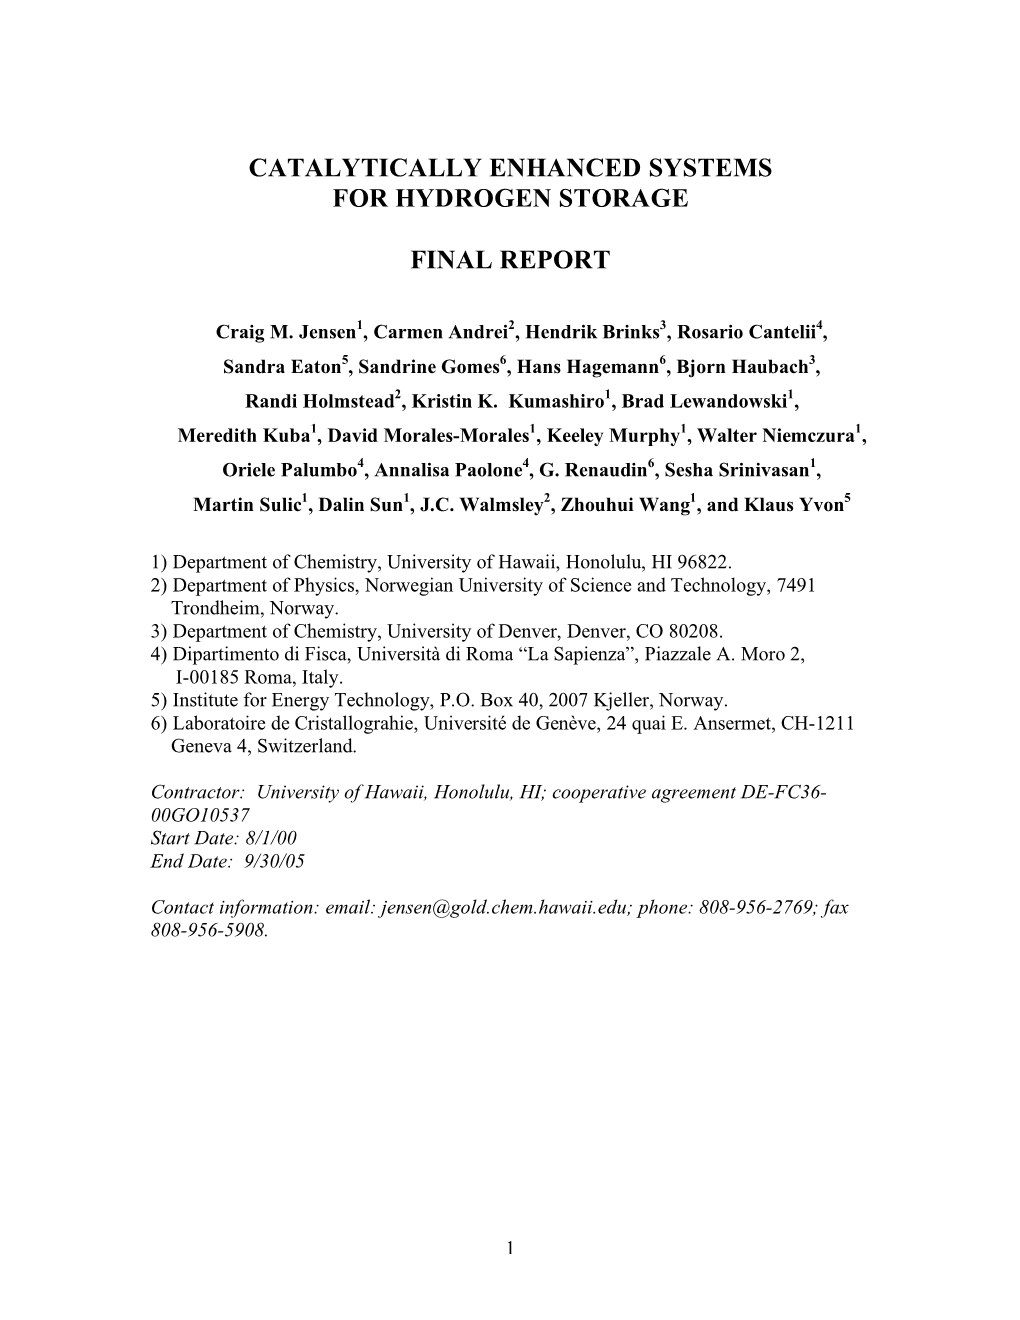 Catalytically Enhanced Systems for Hydrogen Storage Final Report